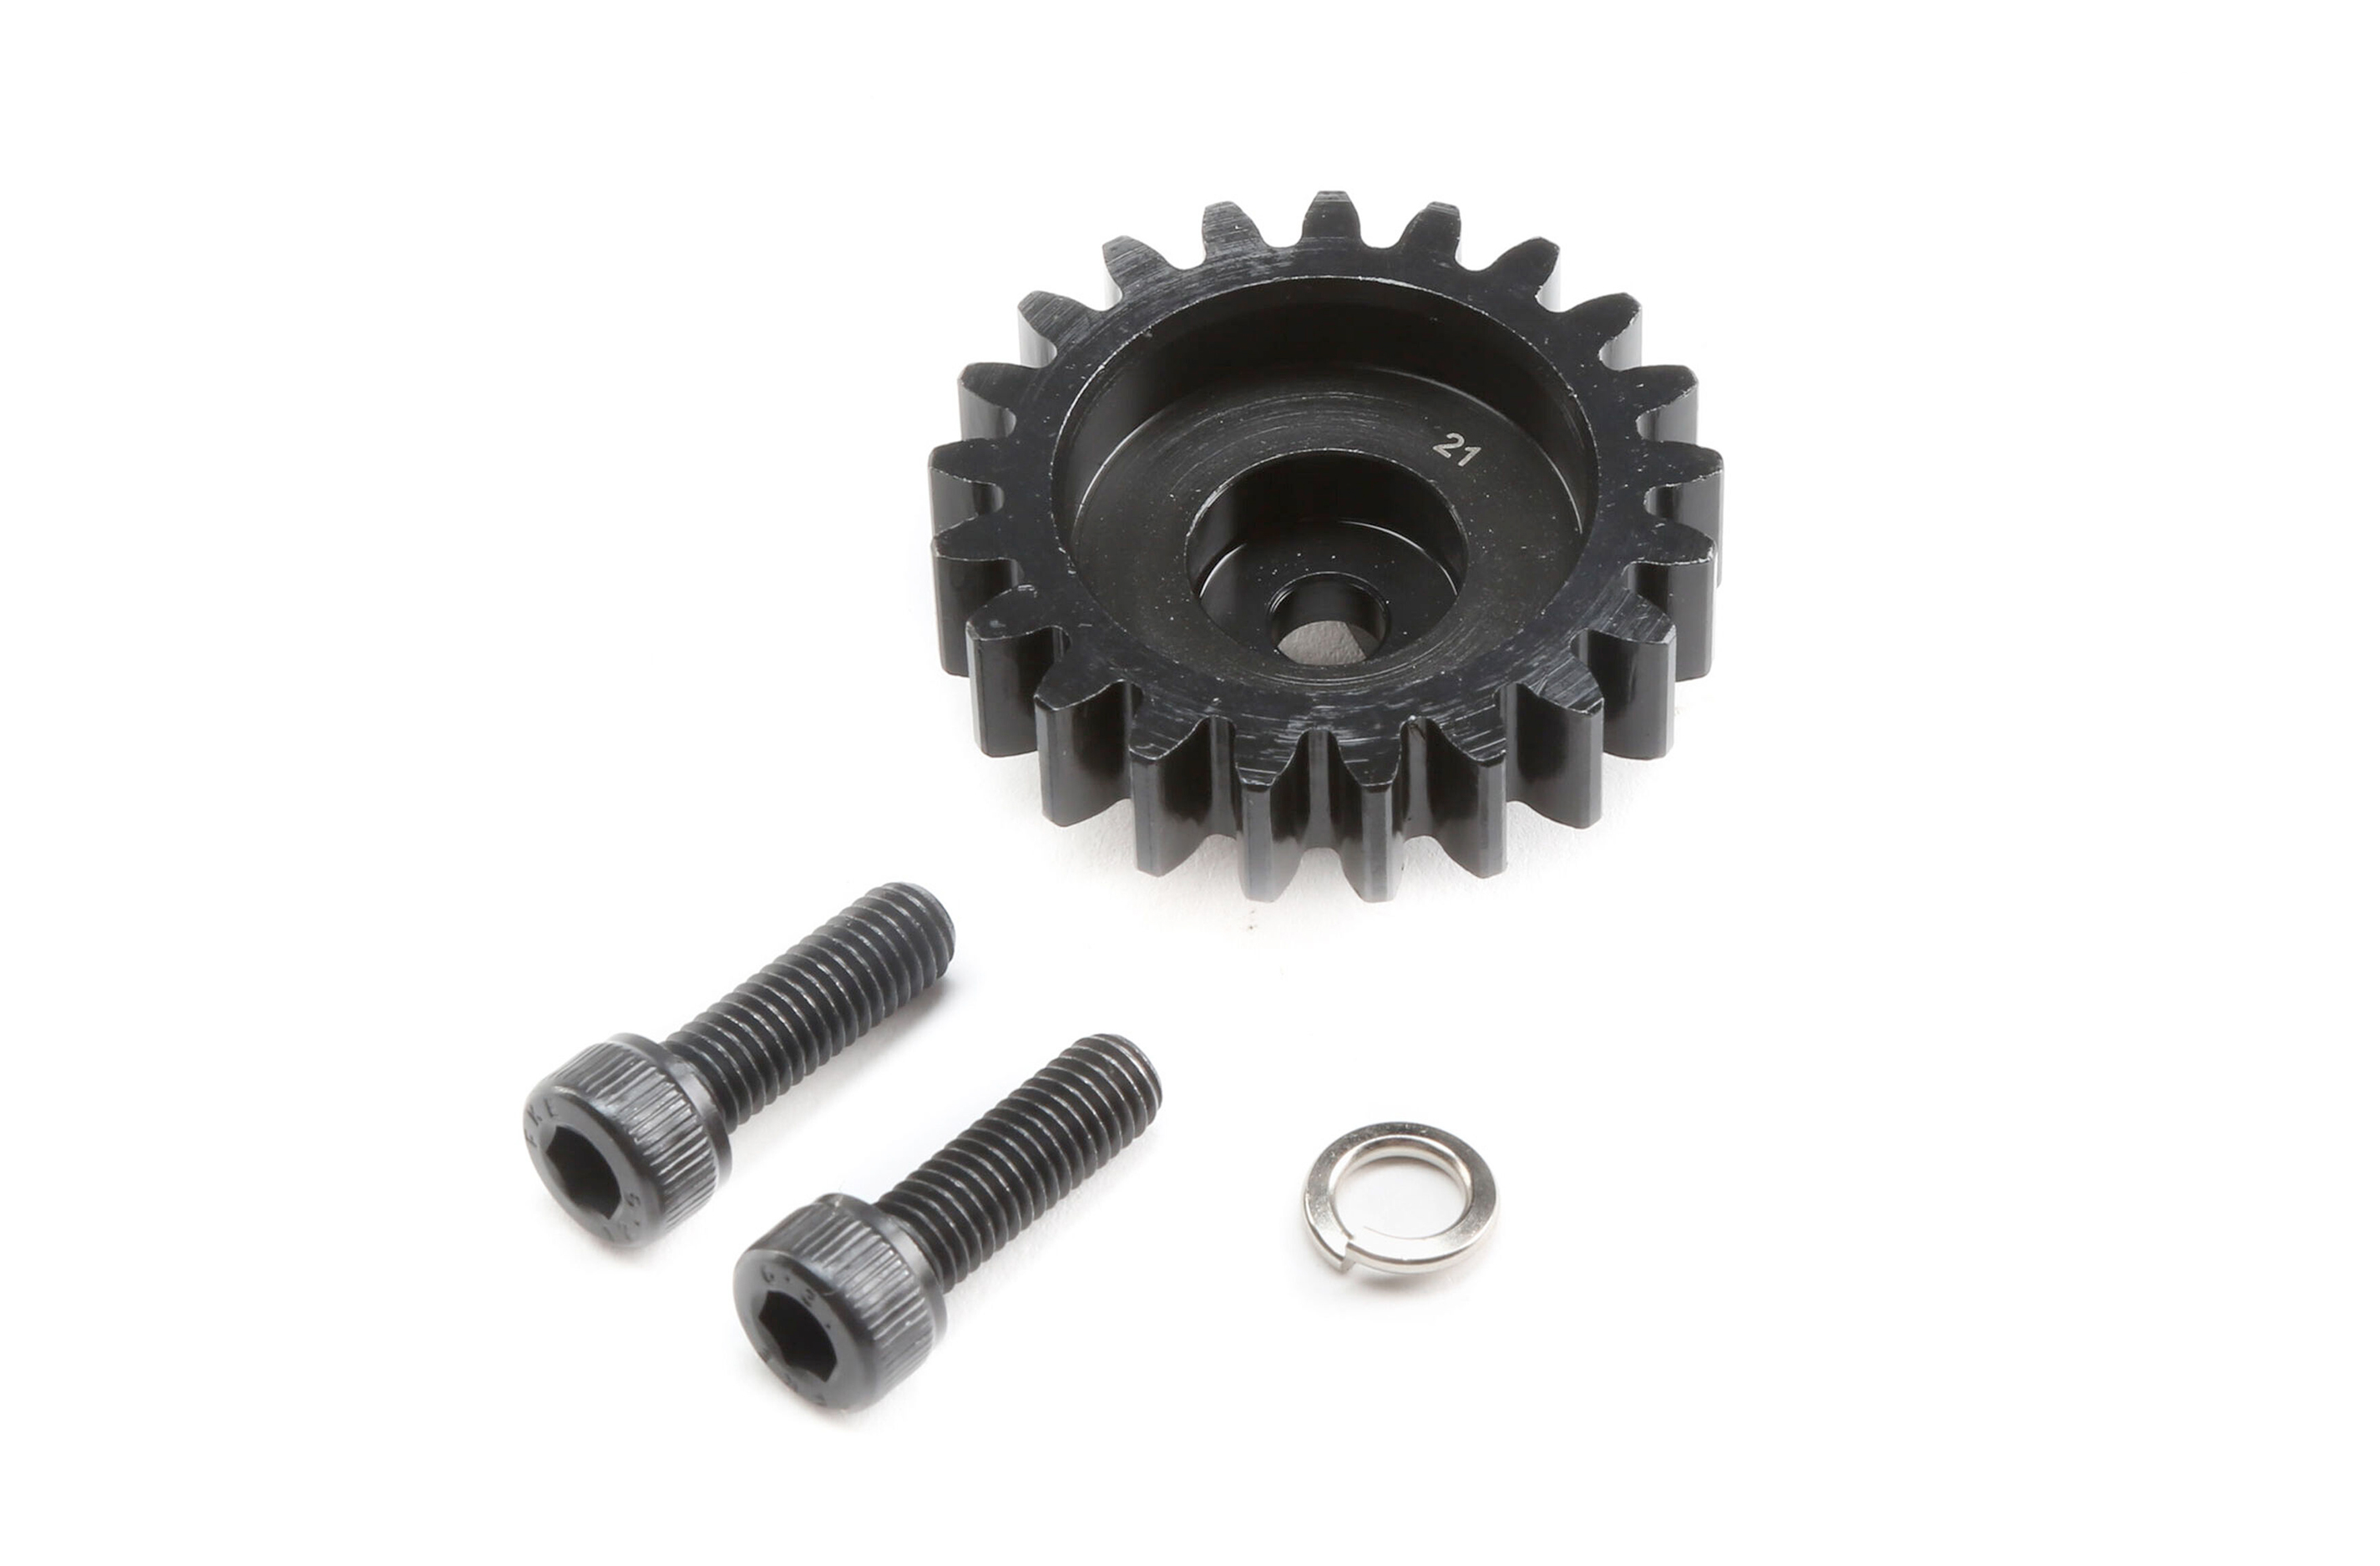 LOS352007 Losi Pinion Gear and Hardware, 21T, 1.5M for 5ive-T 2.0